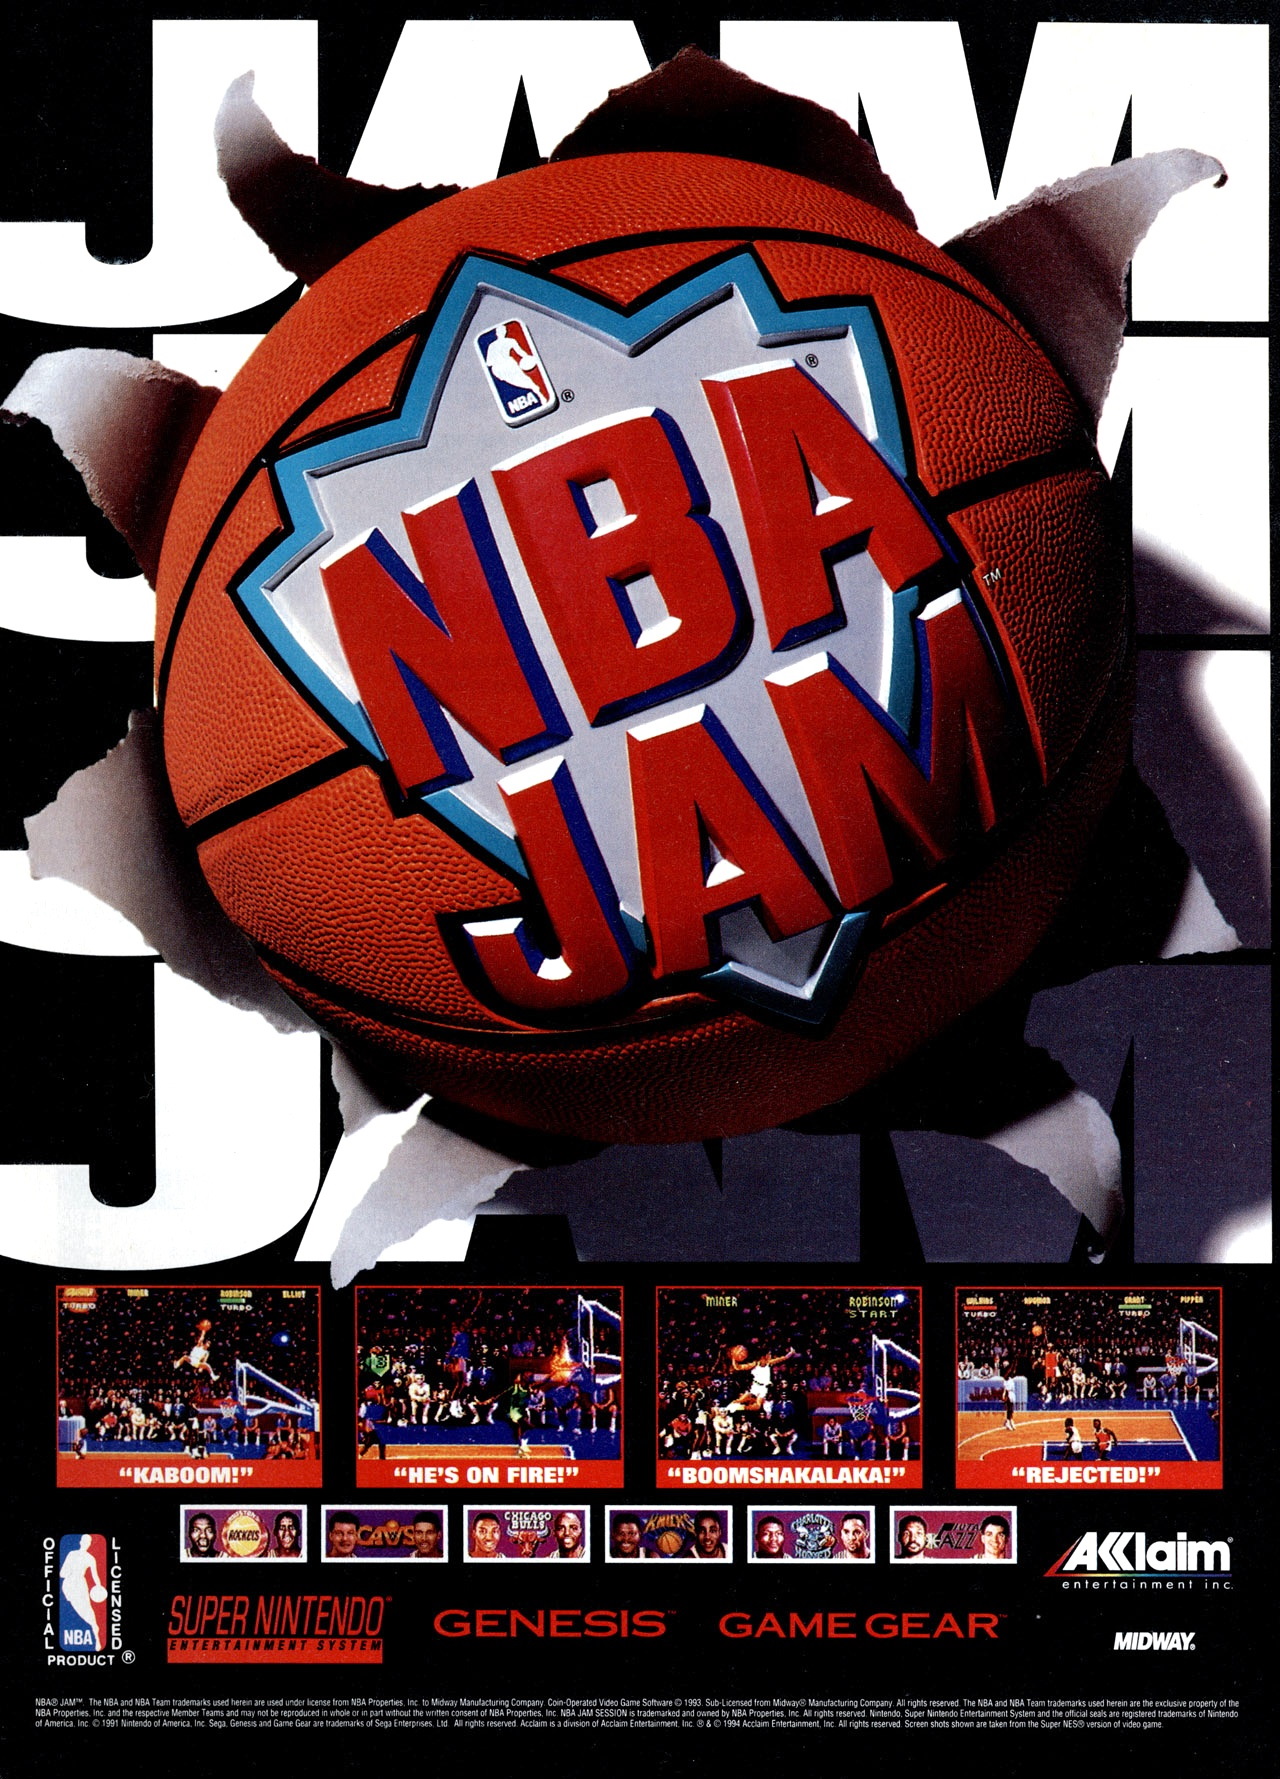 Rumor: An NBA Jam Revival Could Be Happening This Year